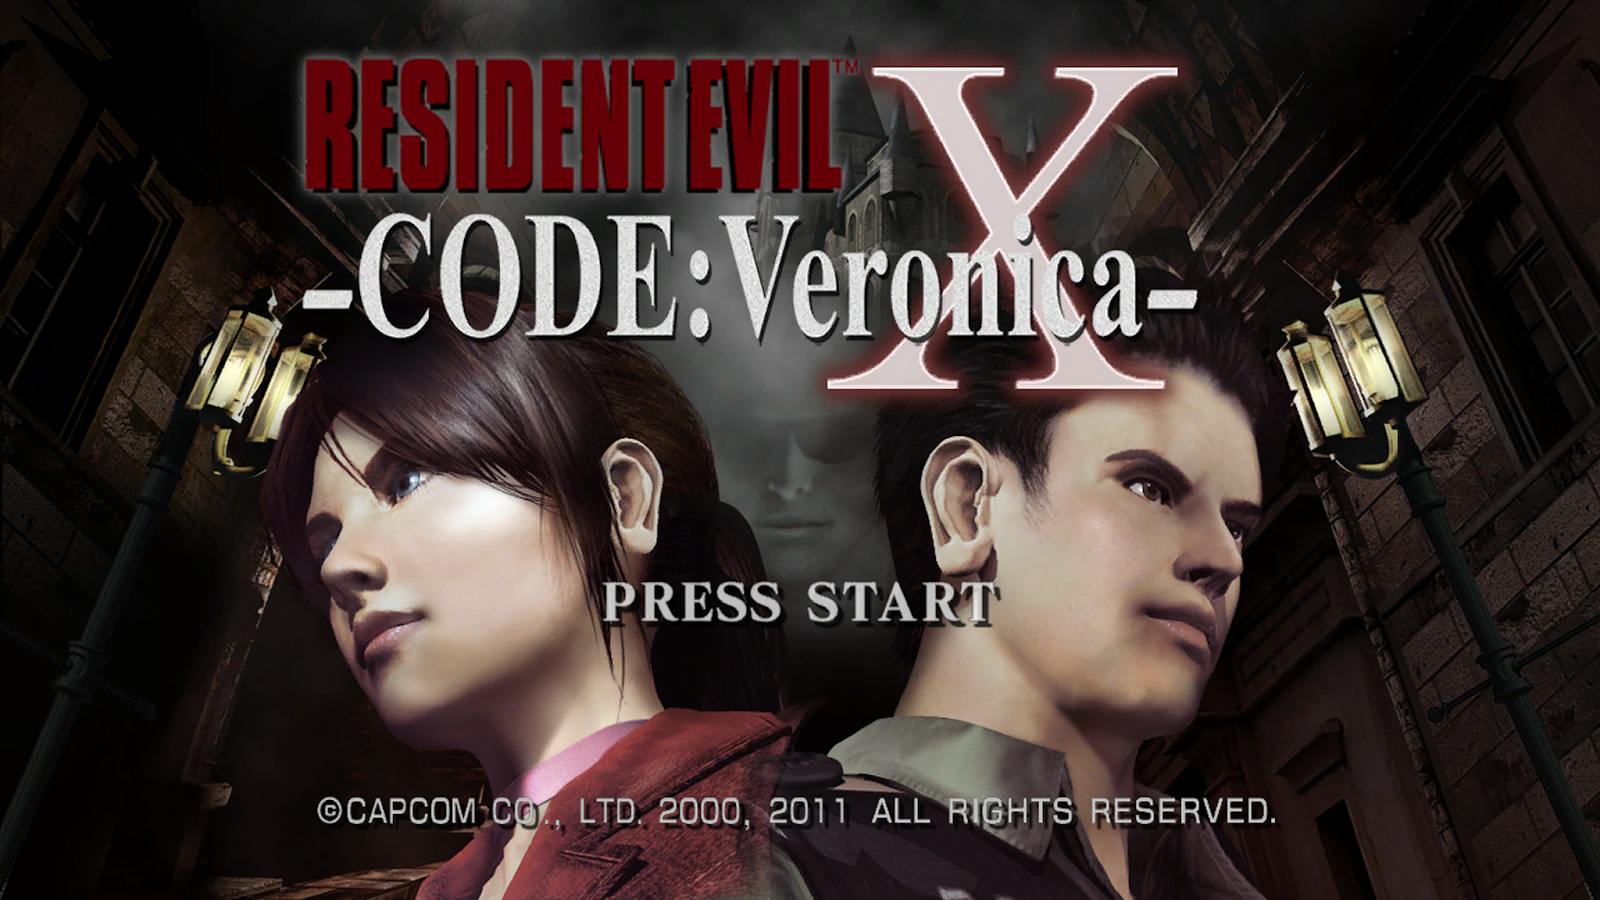 ResidentDante: What's the code, Veronica?